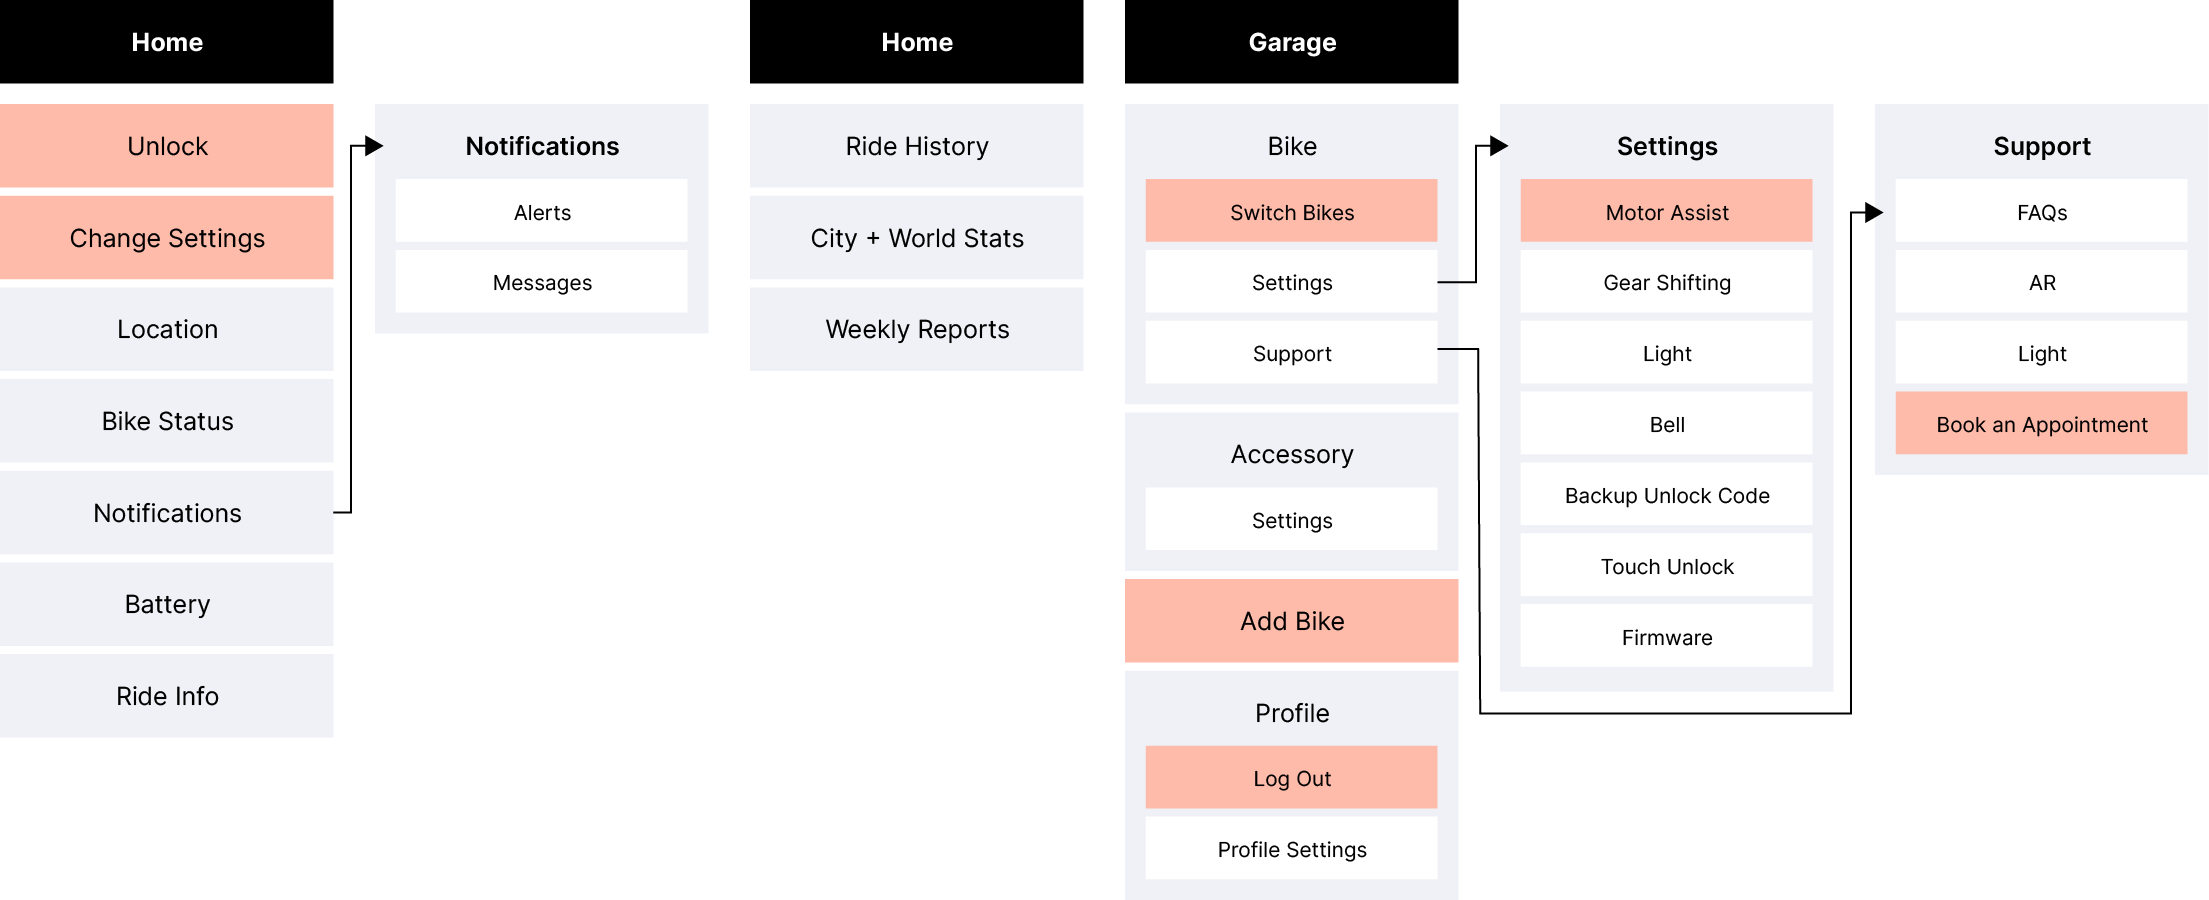 New and simplified app information architecture